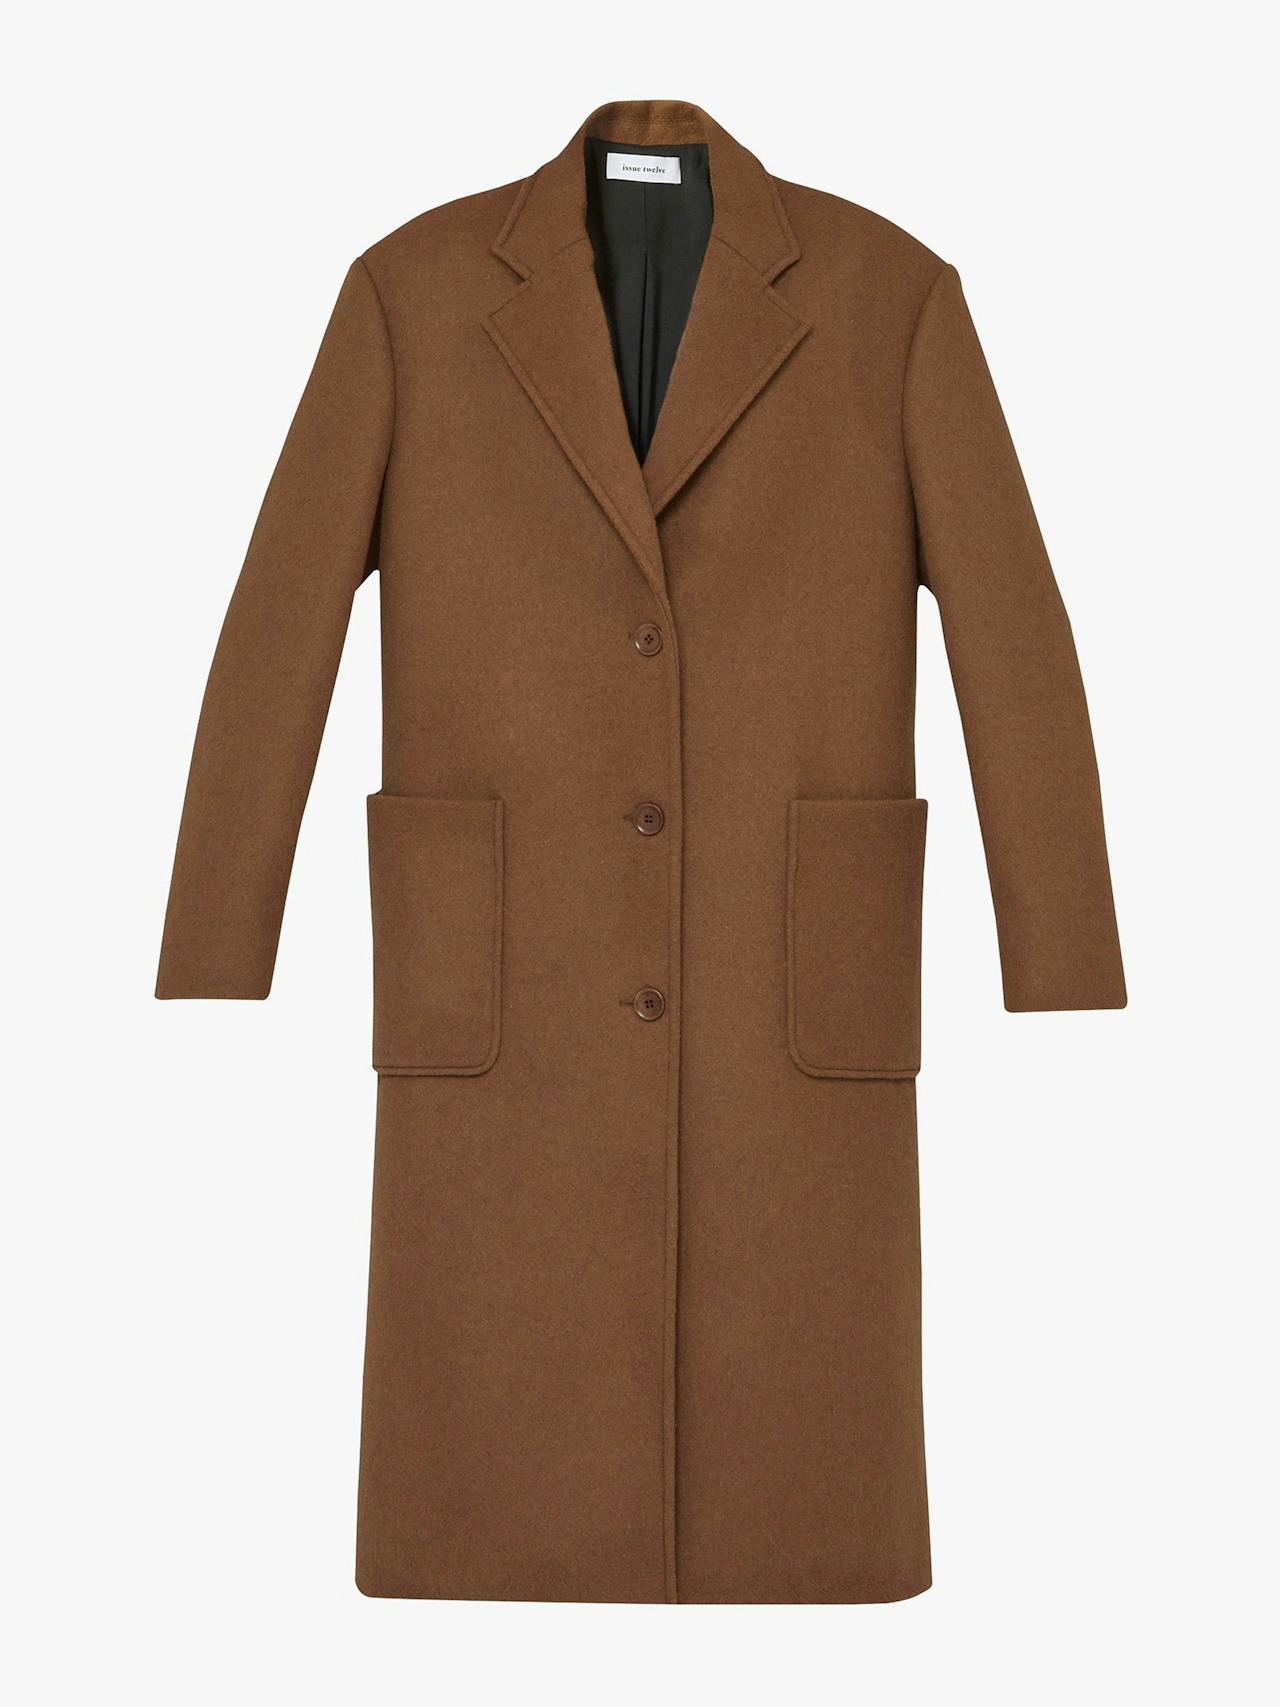 The Grandpa brown coat by Issue Twelve is single breasted with an oversized fit. The double-faced cashmere is ideal for Autumn Winter. Collagerie.com